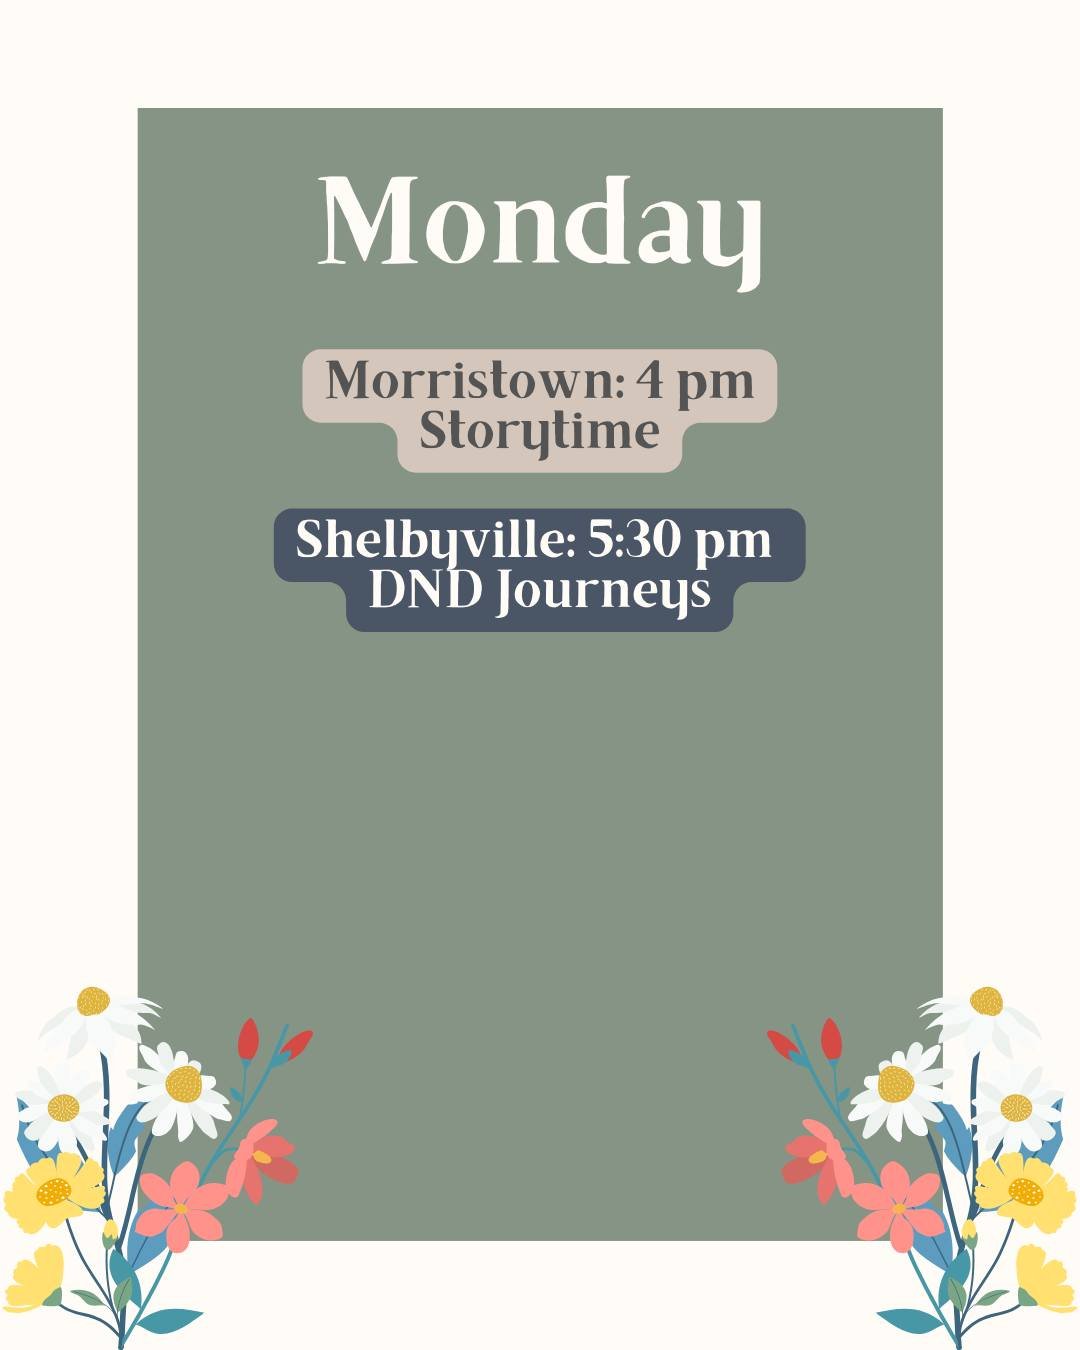 Good morning everyone! What do you think of these weekend posts? Do you find them helpful?
.
.
.
#Fyp #Shelbyvilleindiana #Indiana #Library #Books #reading #local #free #TBR #Community